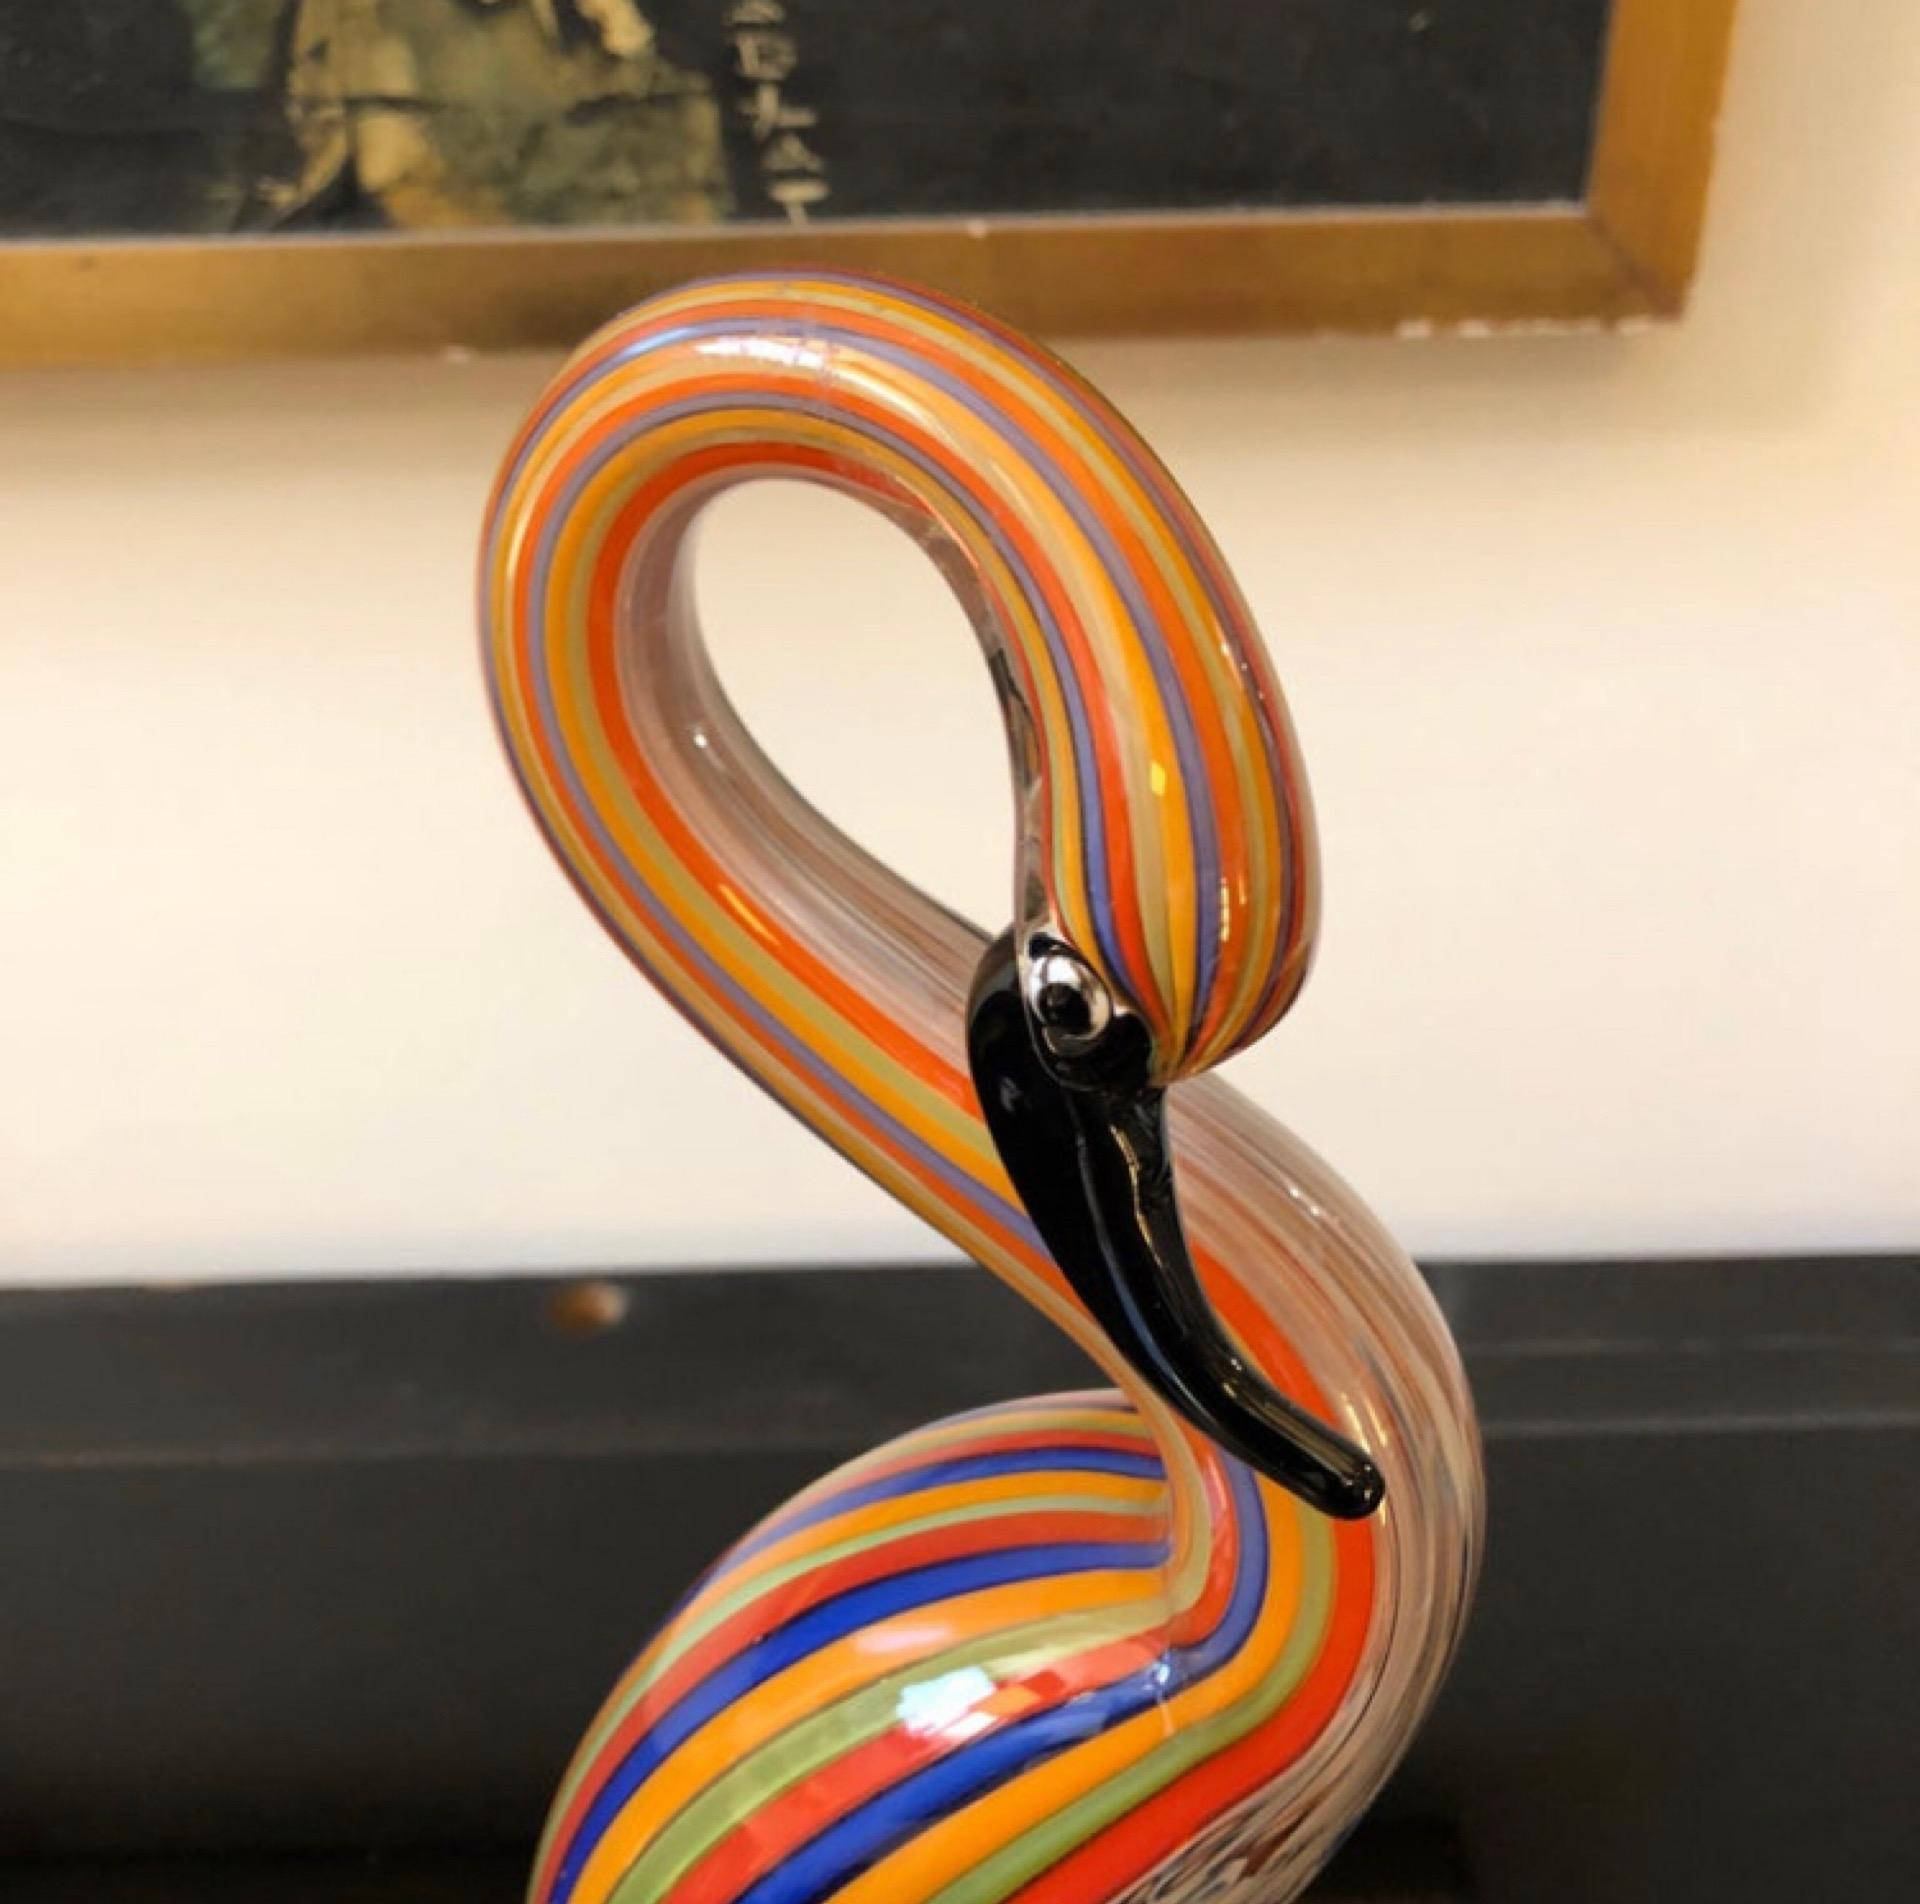 A polychrome striped Murano glass sculpture of a flamingo, designed and manufactured in Italy in the Seventies by Ferro & Lazzarini. It's in perfect conditions and labeled Lazzarini on a side. The Flamingo is a beautiful and unique piece of art